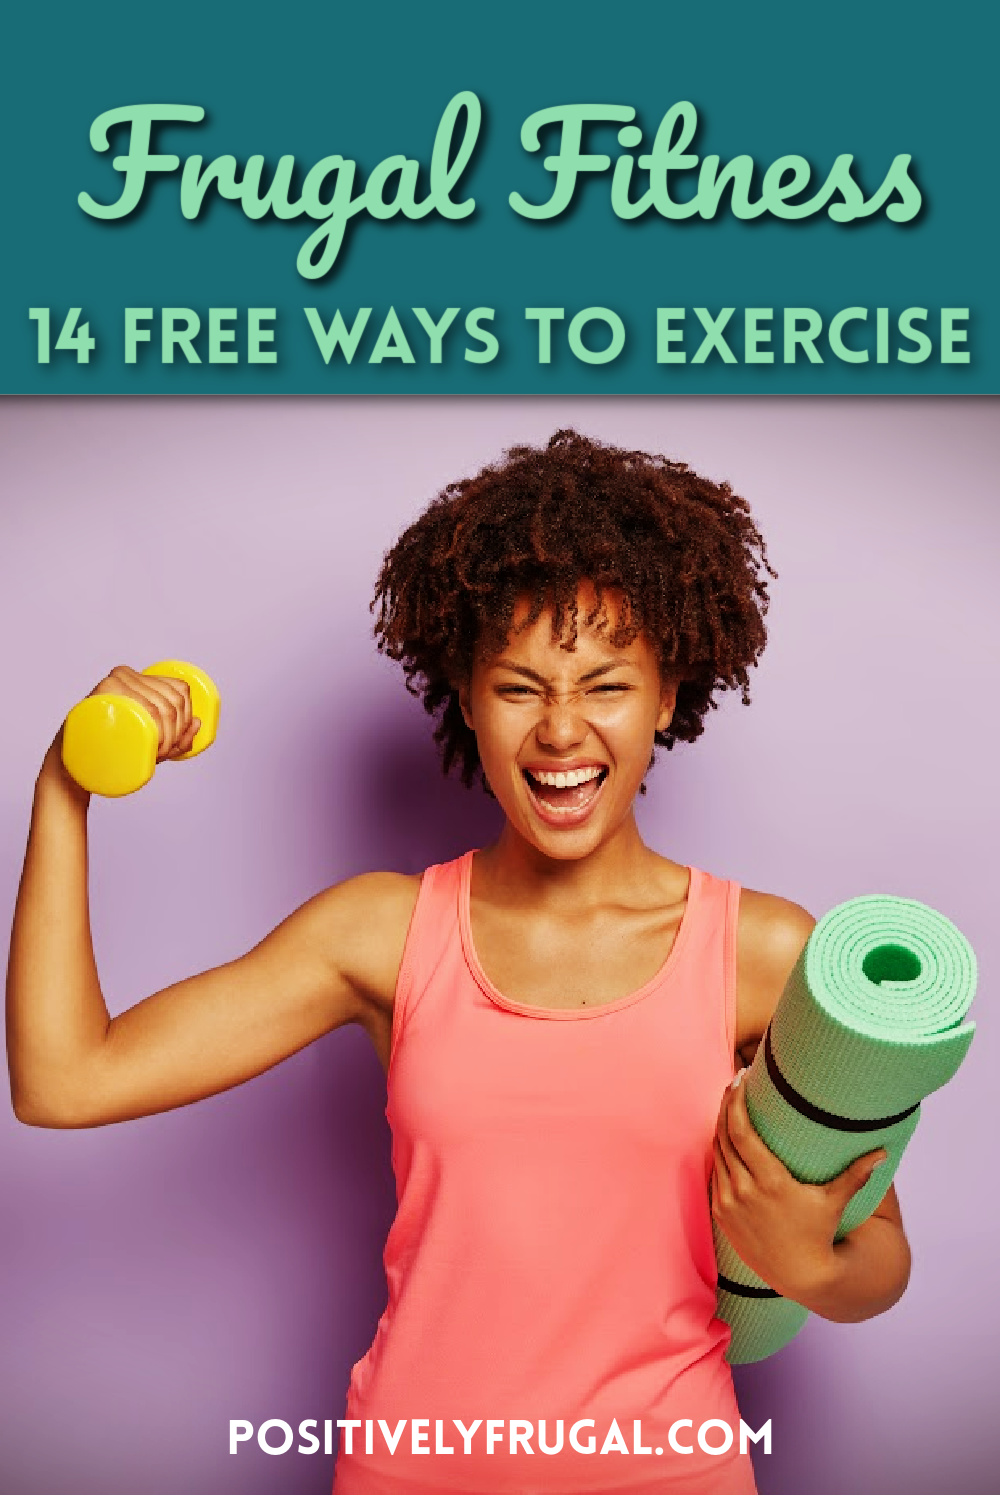 Frugal Fitness Free Ways To Exercise by PositivelyFrugal.com